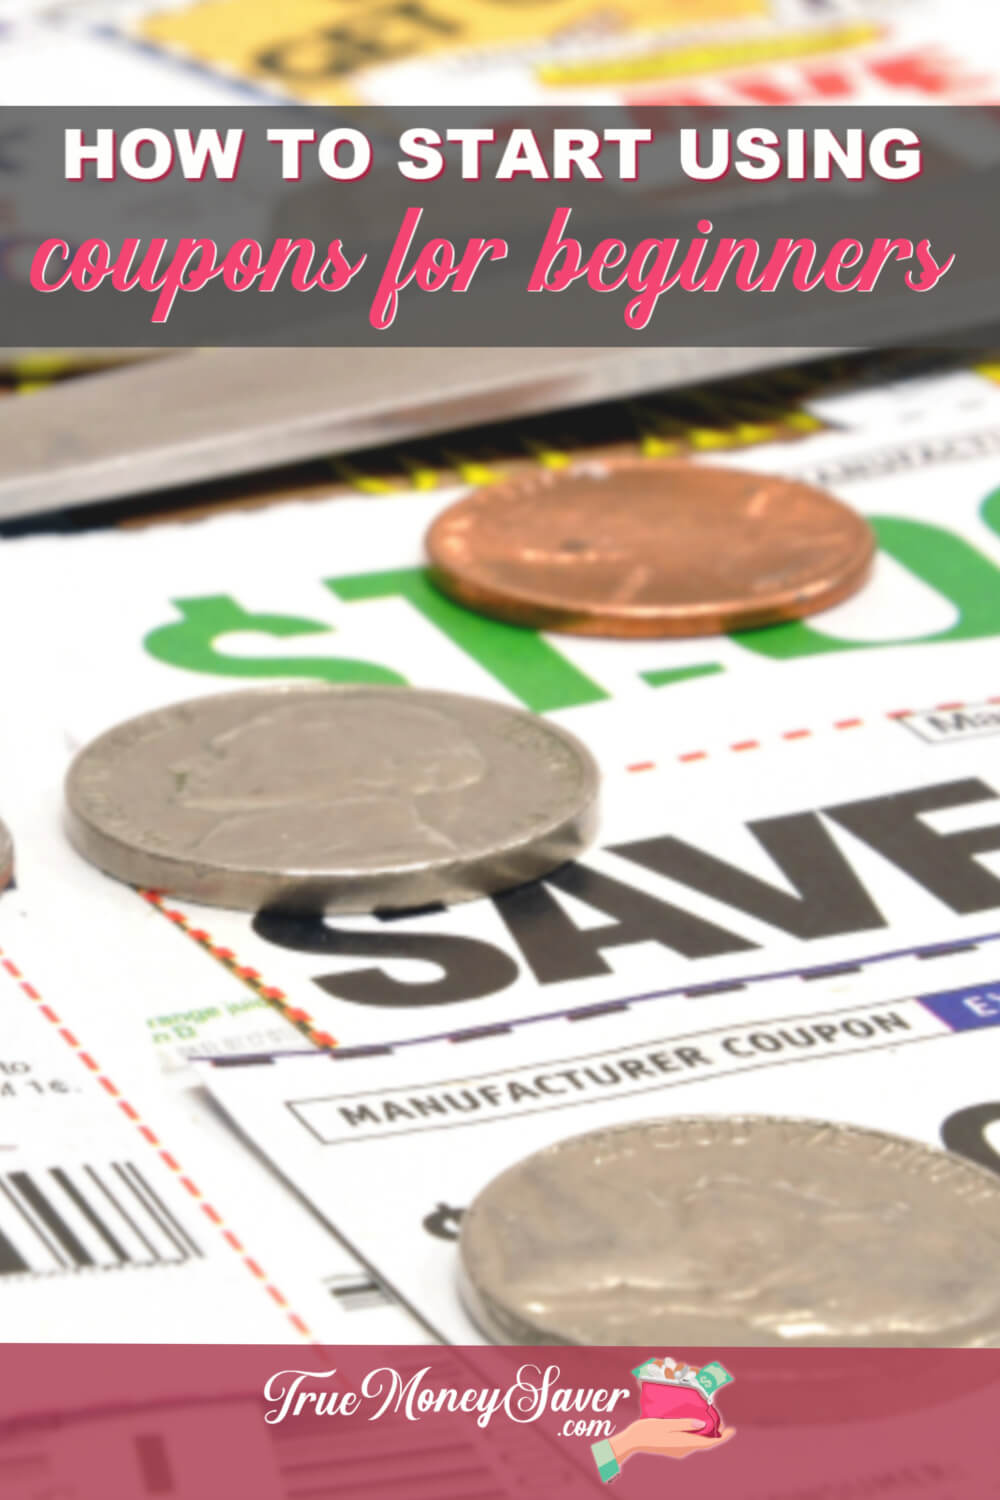 How To Start Using Coupons For Beginners